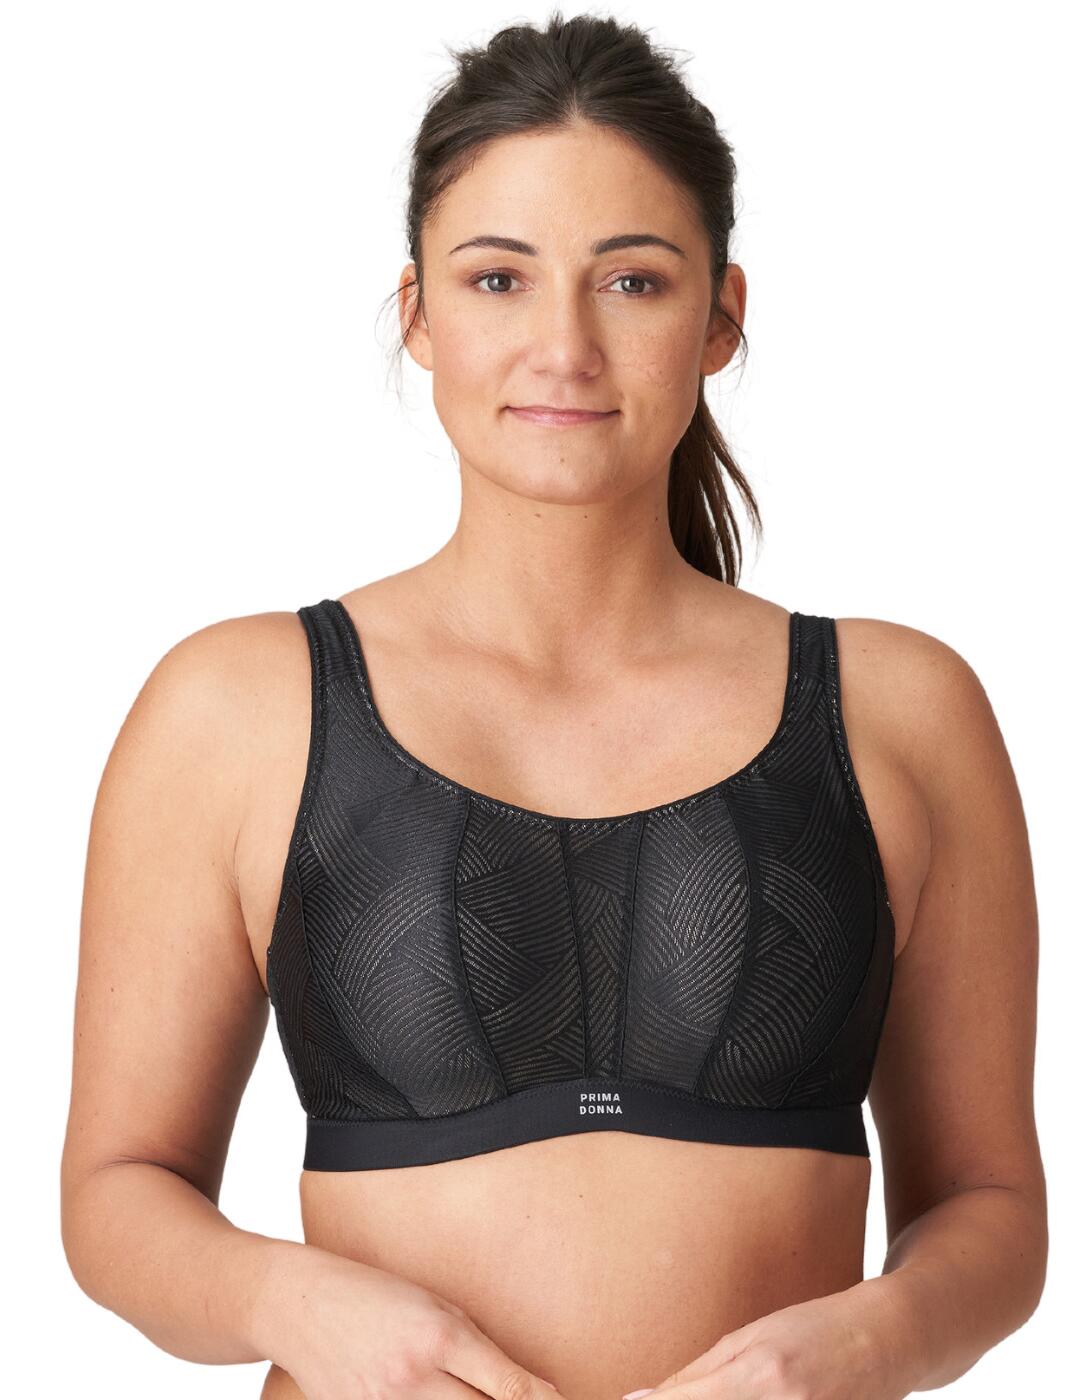 Looking for sports bra - Athletic apparel